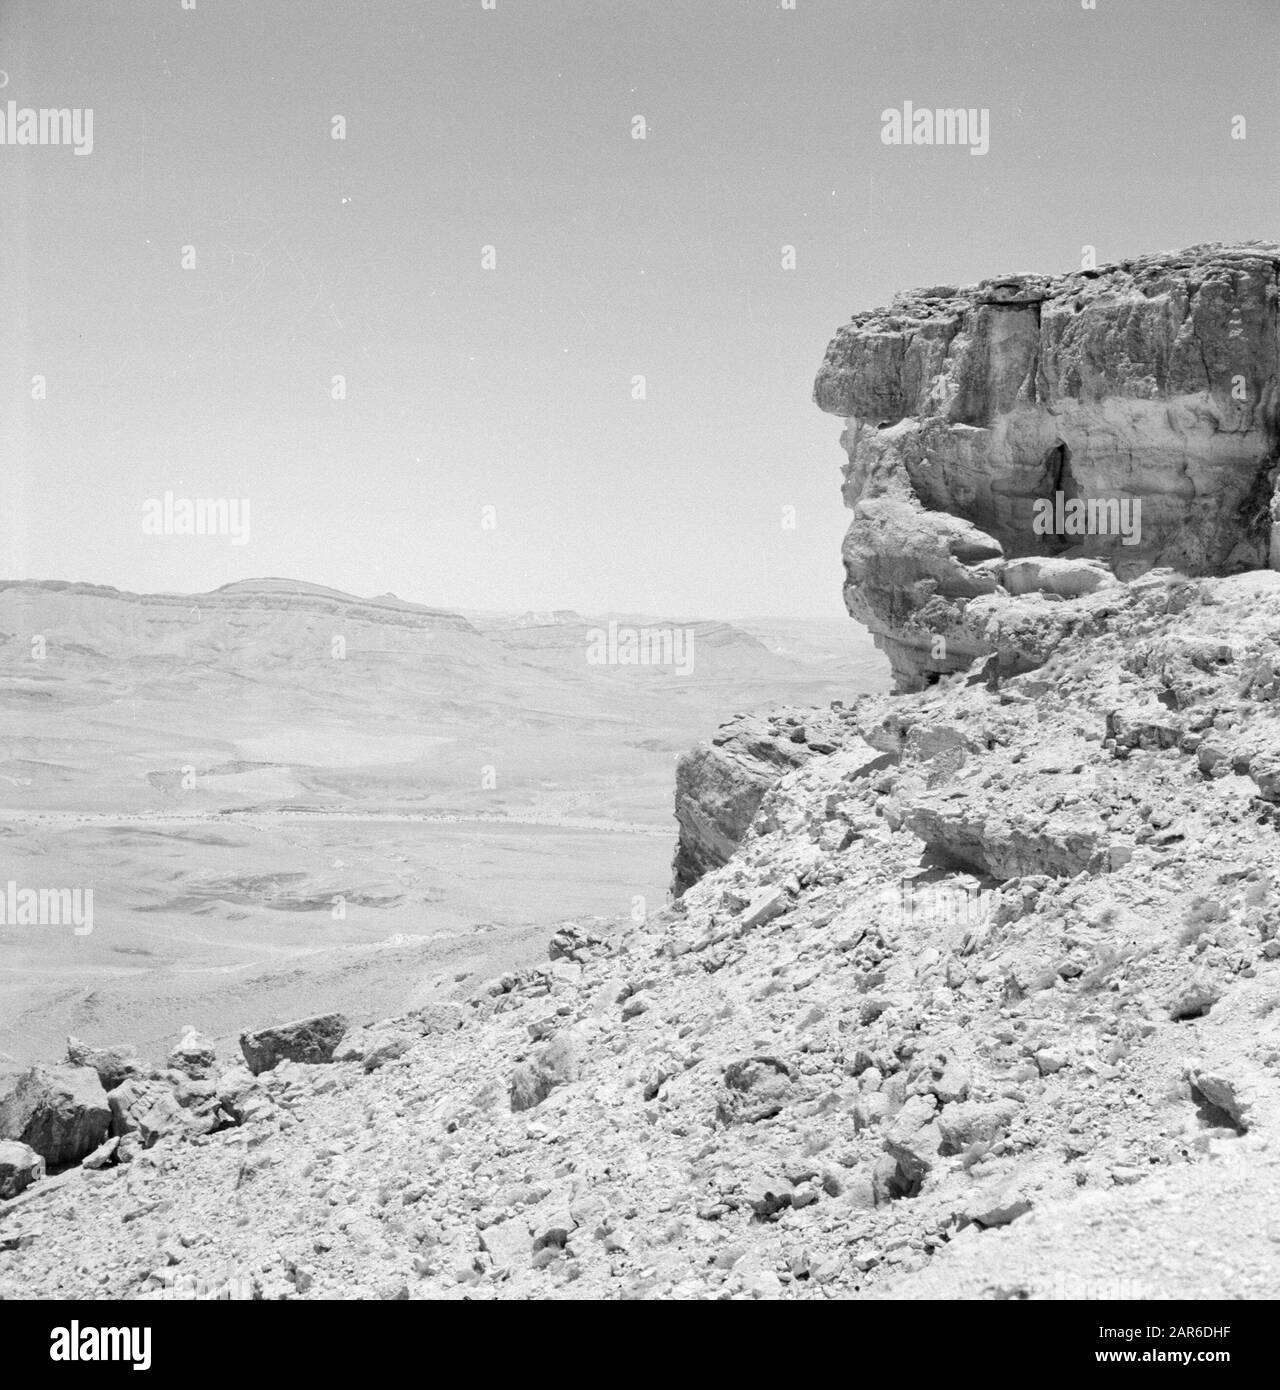 Israel 1960-1965: Negevdesert, the road to Eilat  Makhtesh-Ramon. A glimpse into the valley in a highly eroded mountain landscape. In fact the walls of one of the largest impact craters in the world Date: January 1, 1960 Location: Israel, Negev Keywords: mountains, geology, panoramas, rocks, valleys, deserts Stock Photo